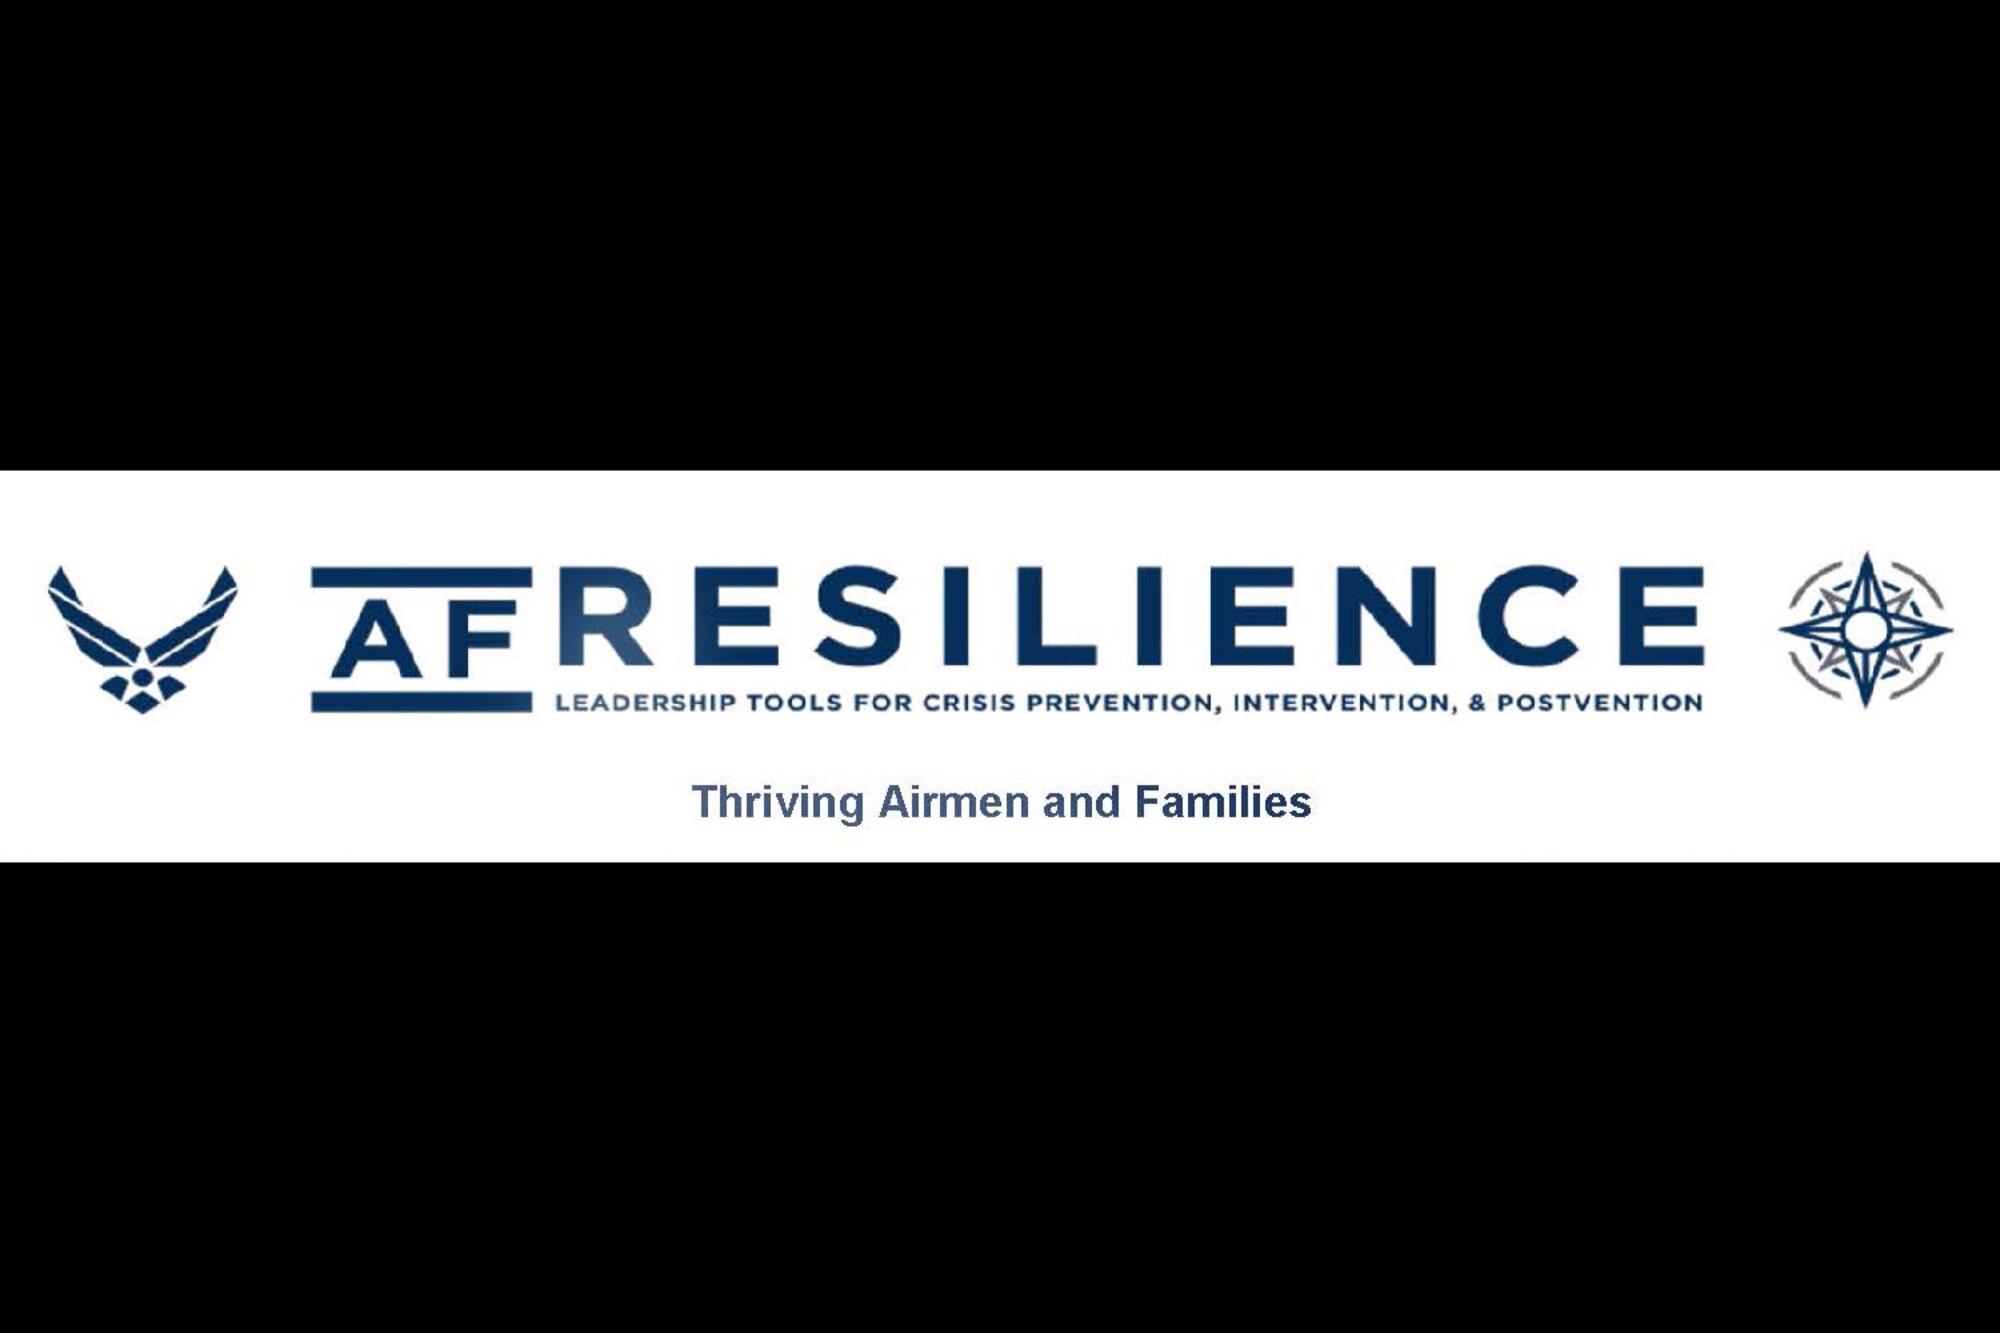 We have lost 11 Airmen over the last 4 weeks and more than 100 Total Force Airmen in 2018. Despite our collective efforts and responsibility for their well-being, suicide remains the leading cause of death for Airmen. These losses know neither grade, AFSC, status nor unit boundaries.